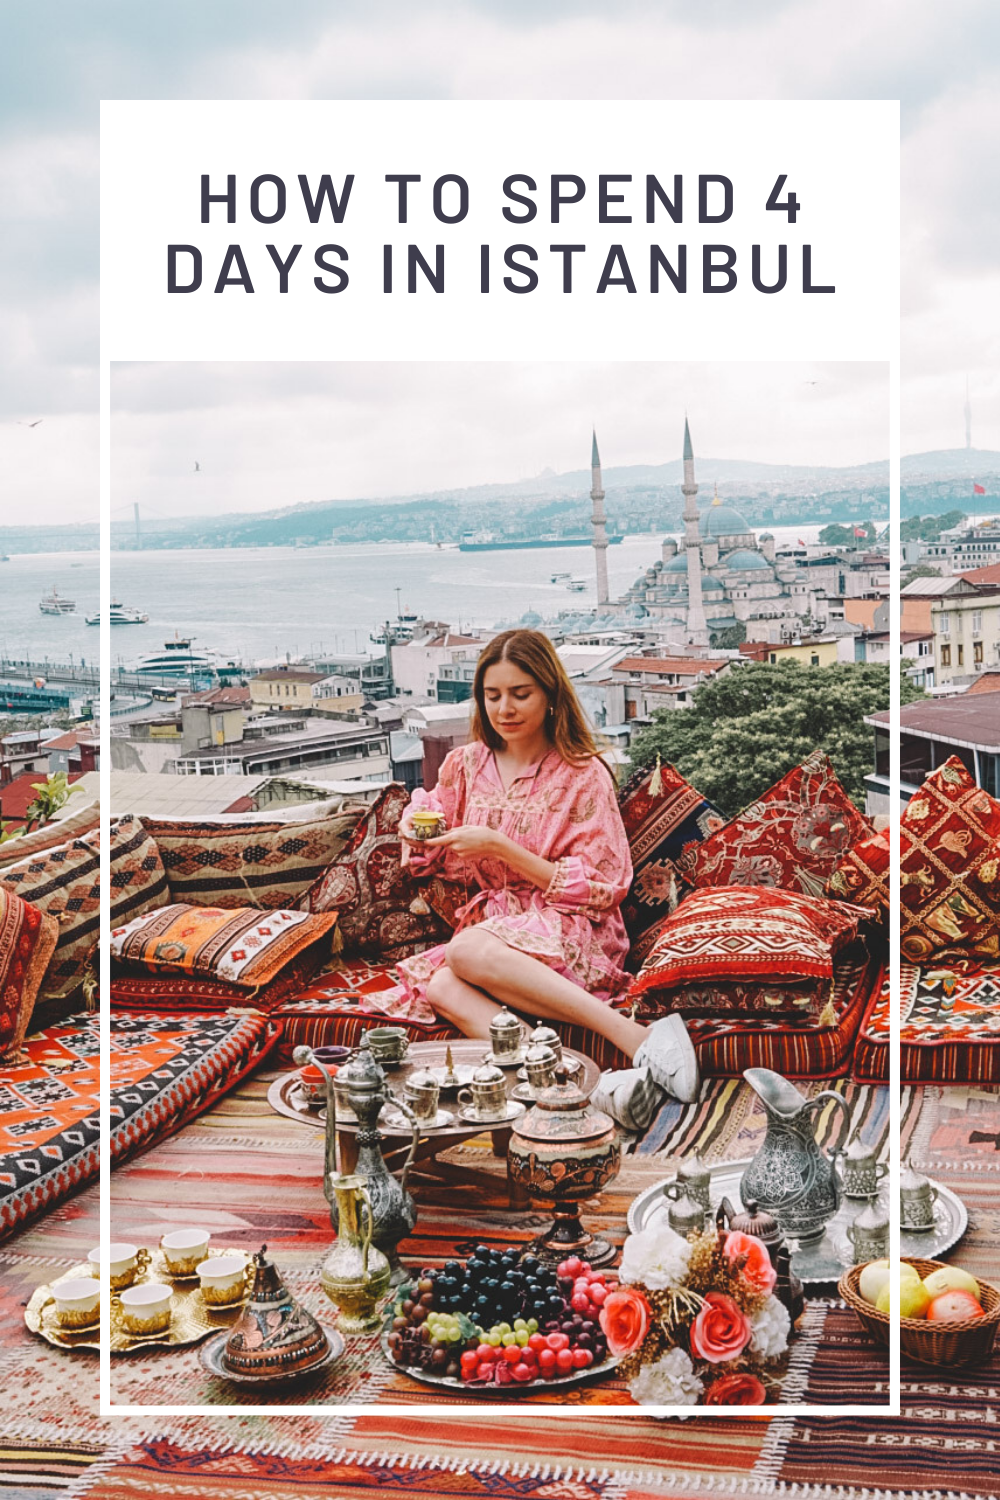 How to spend 4 days in Istanbul